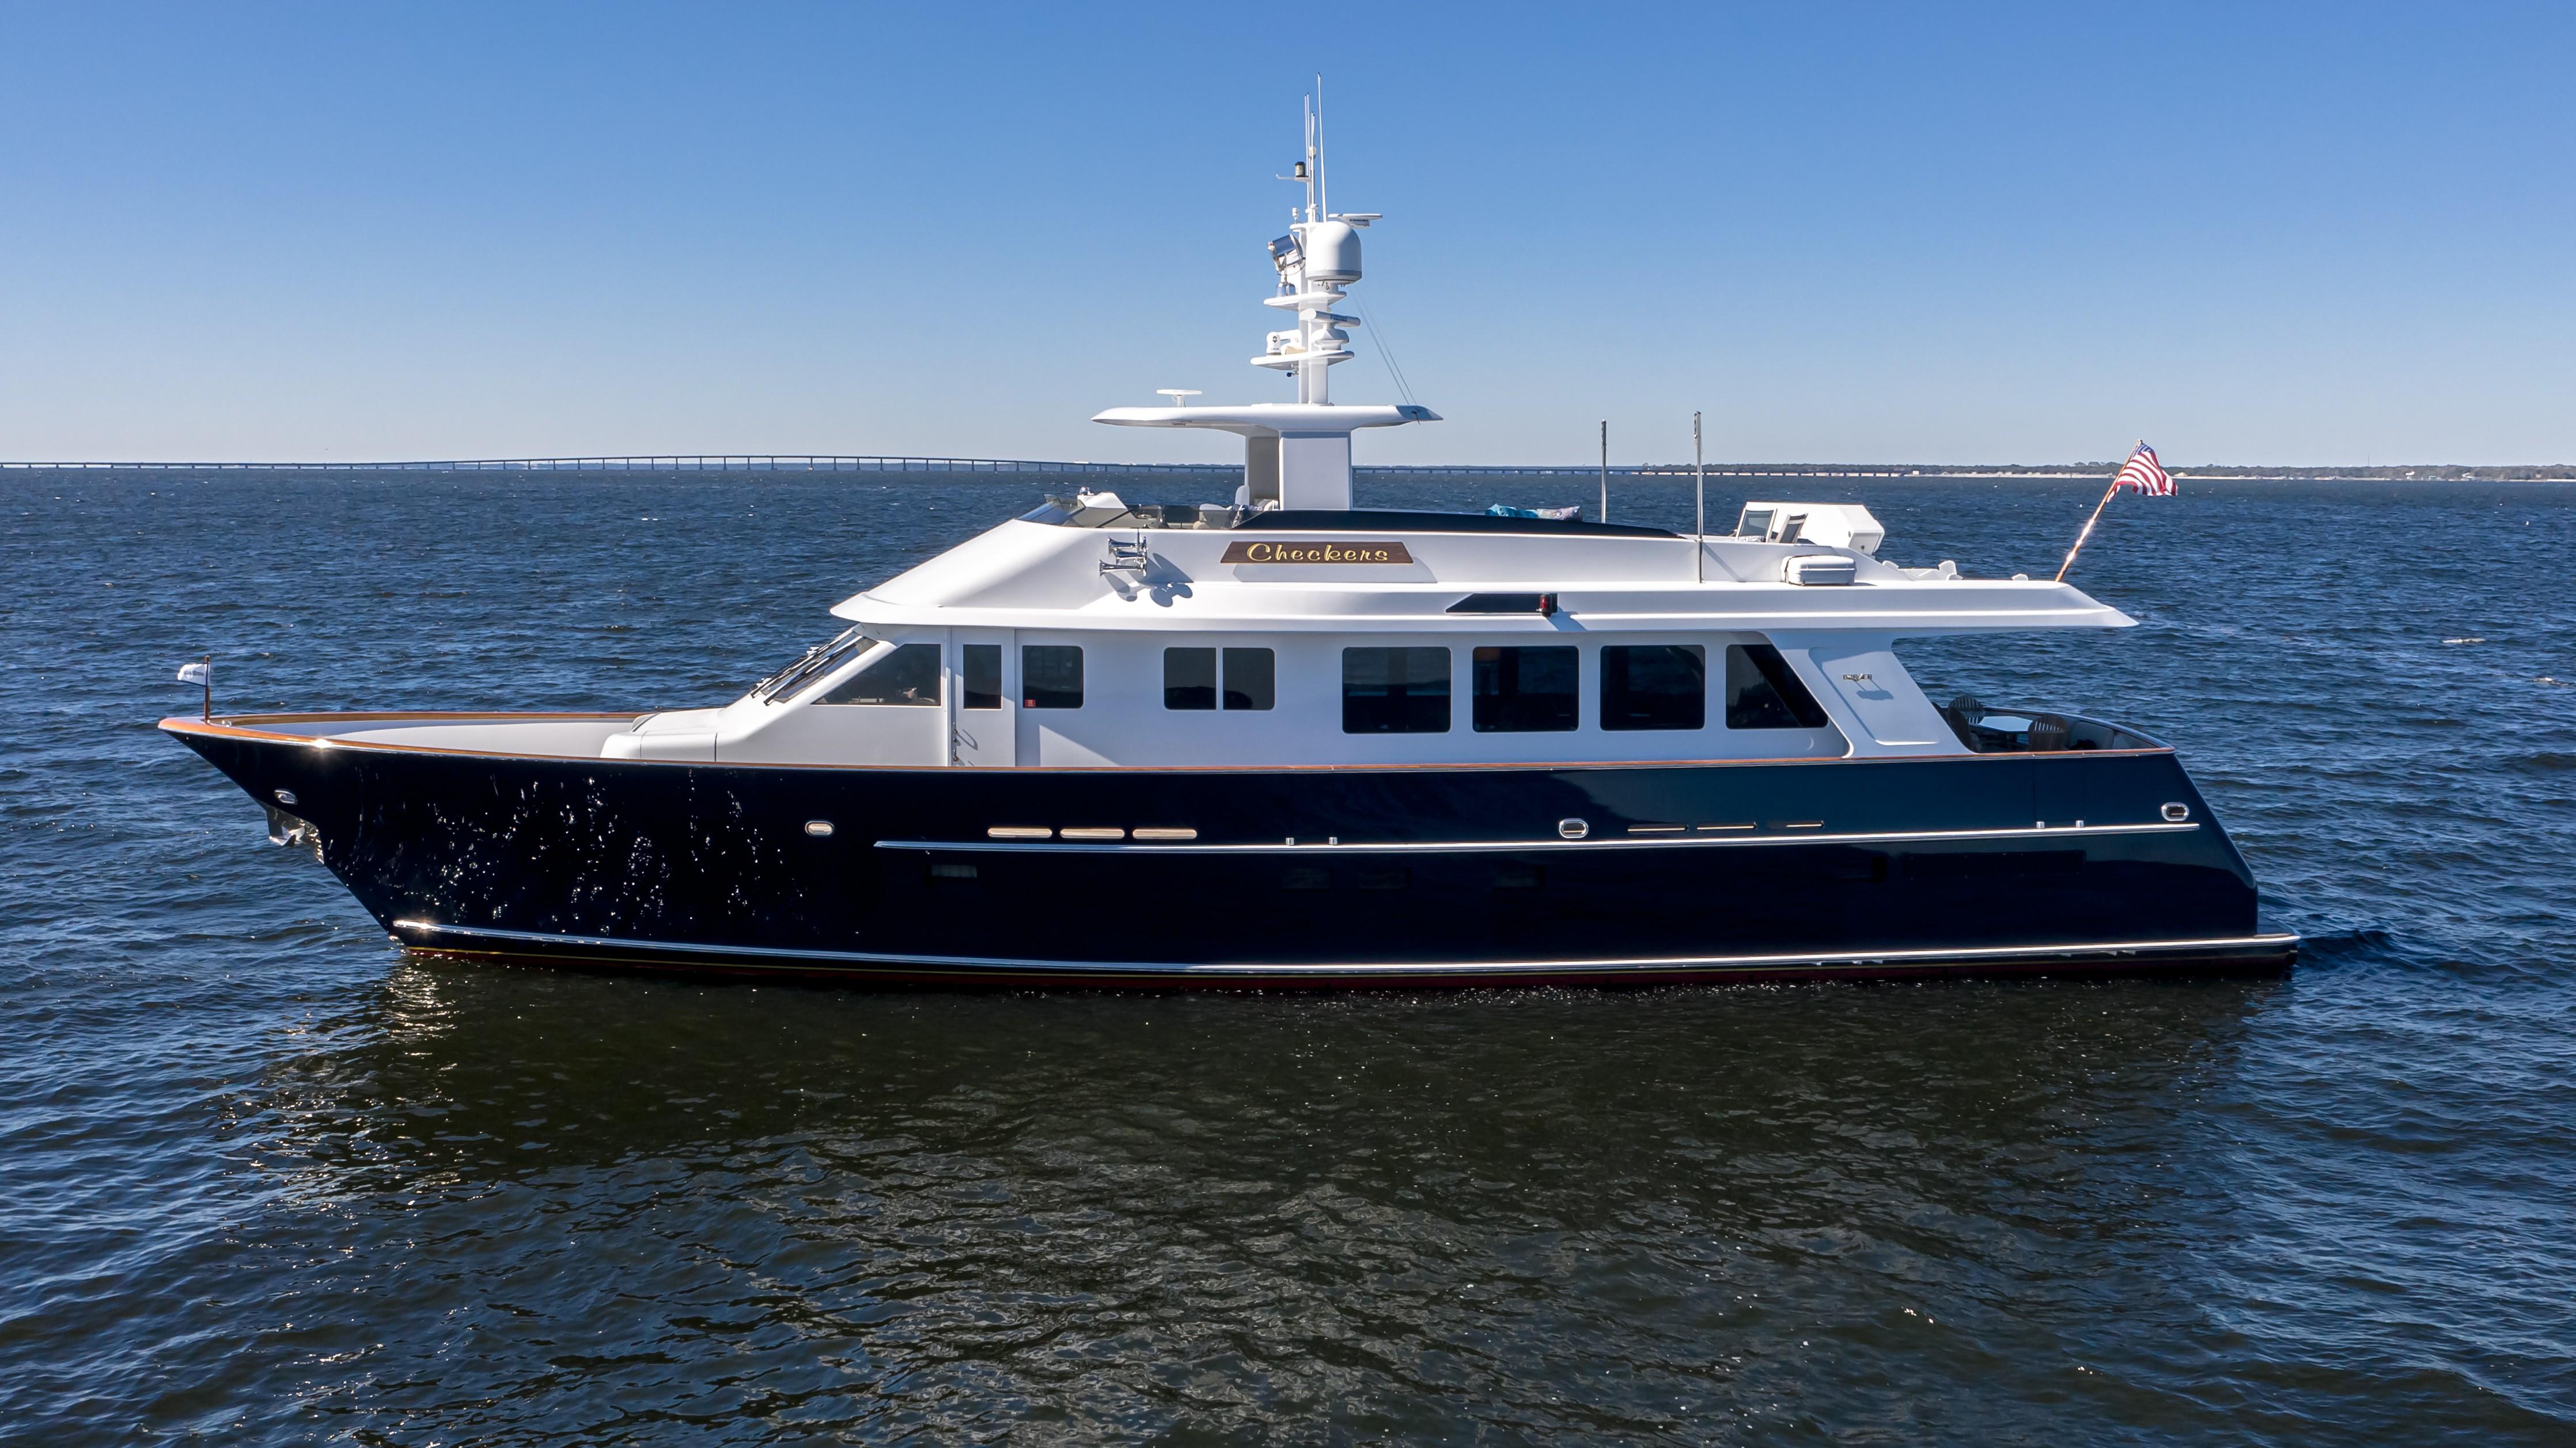 motor yacht checkers for sale